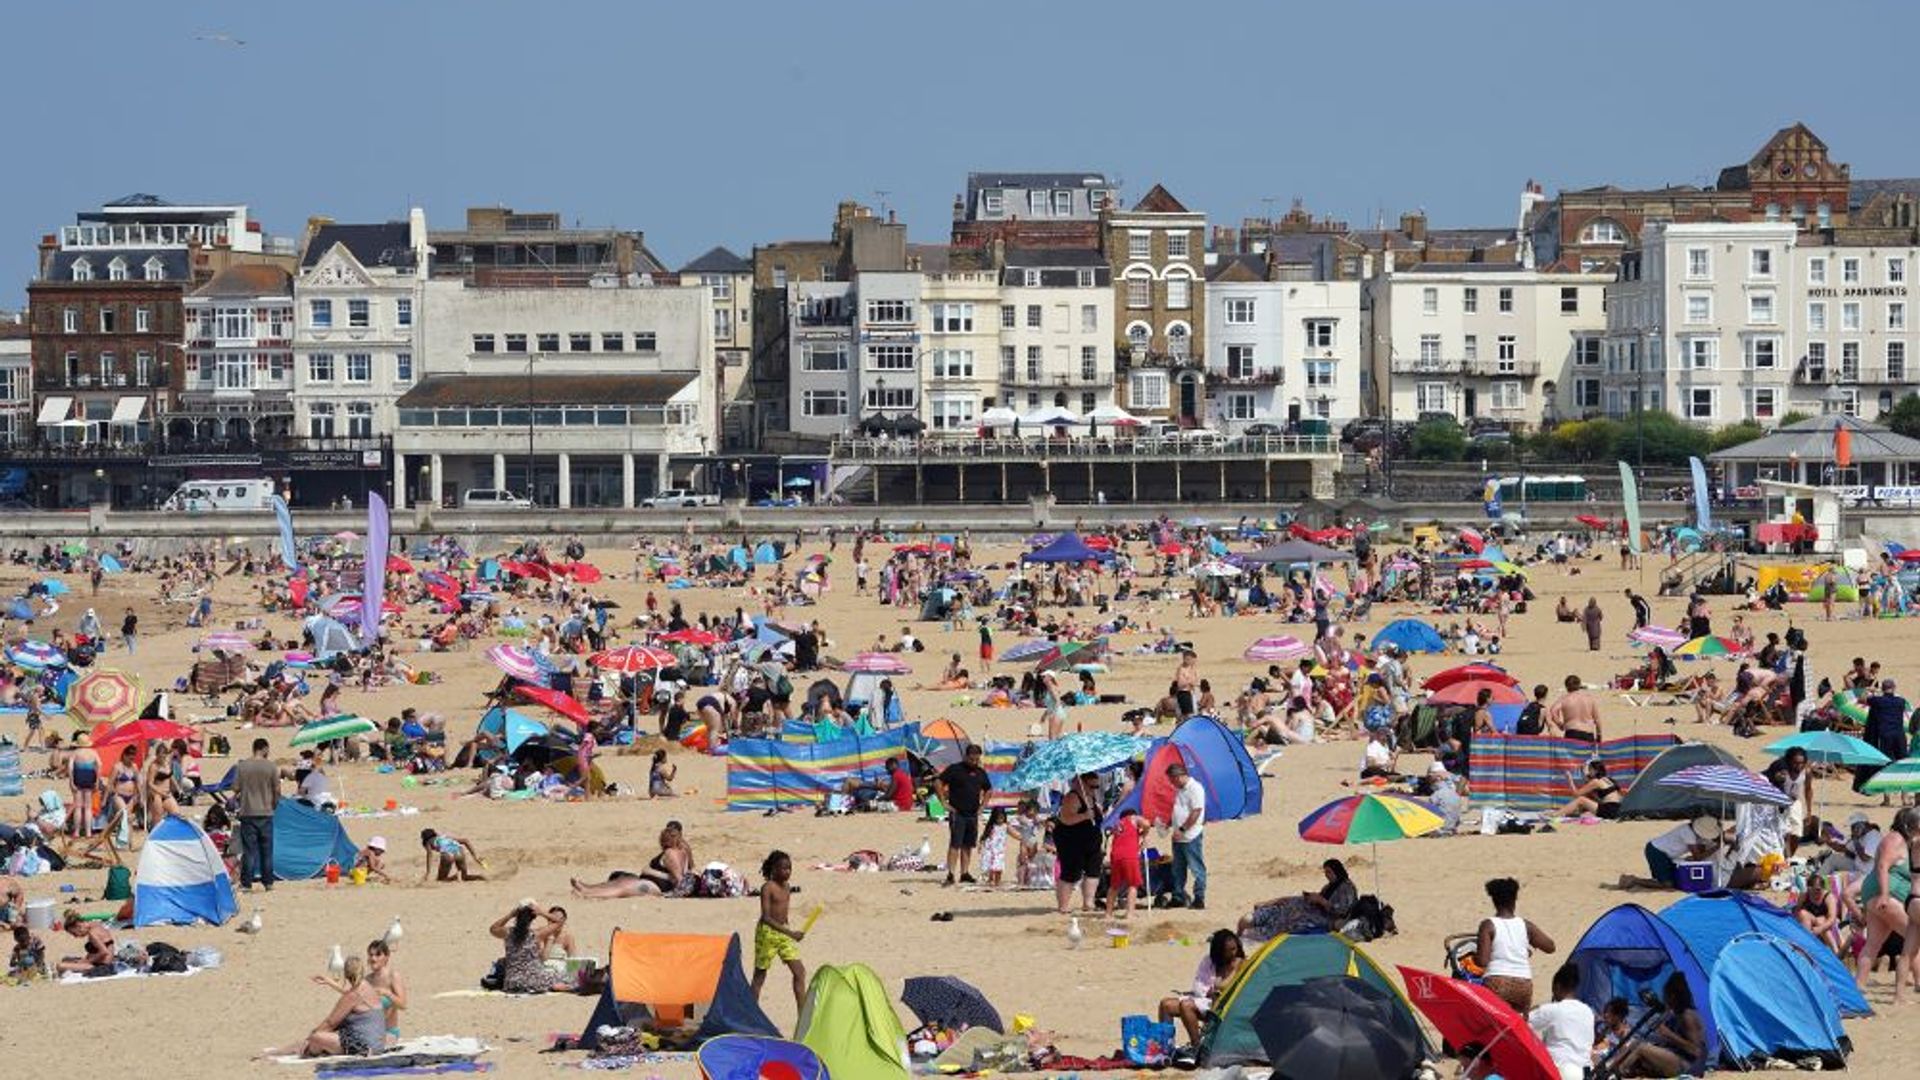 UK heatwave set to end as rain showers hit this weekend